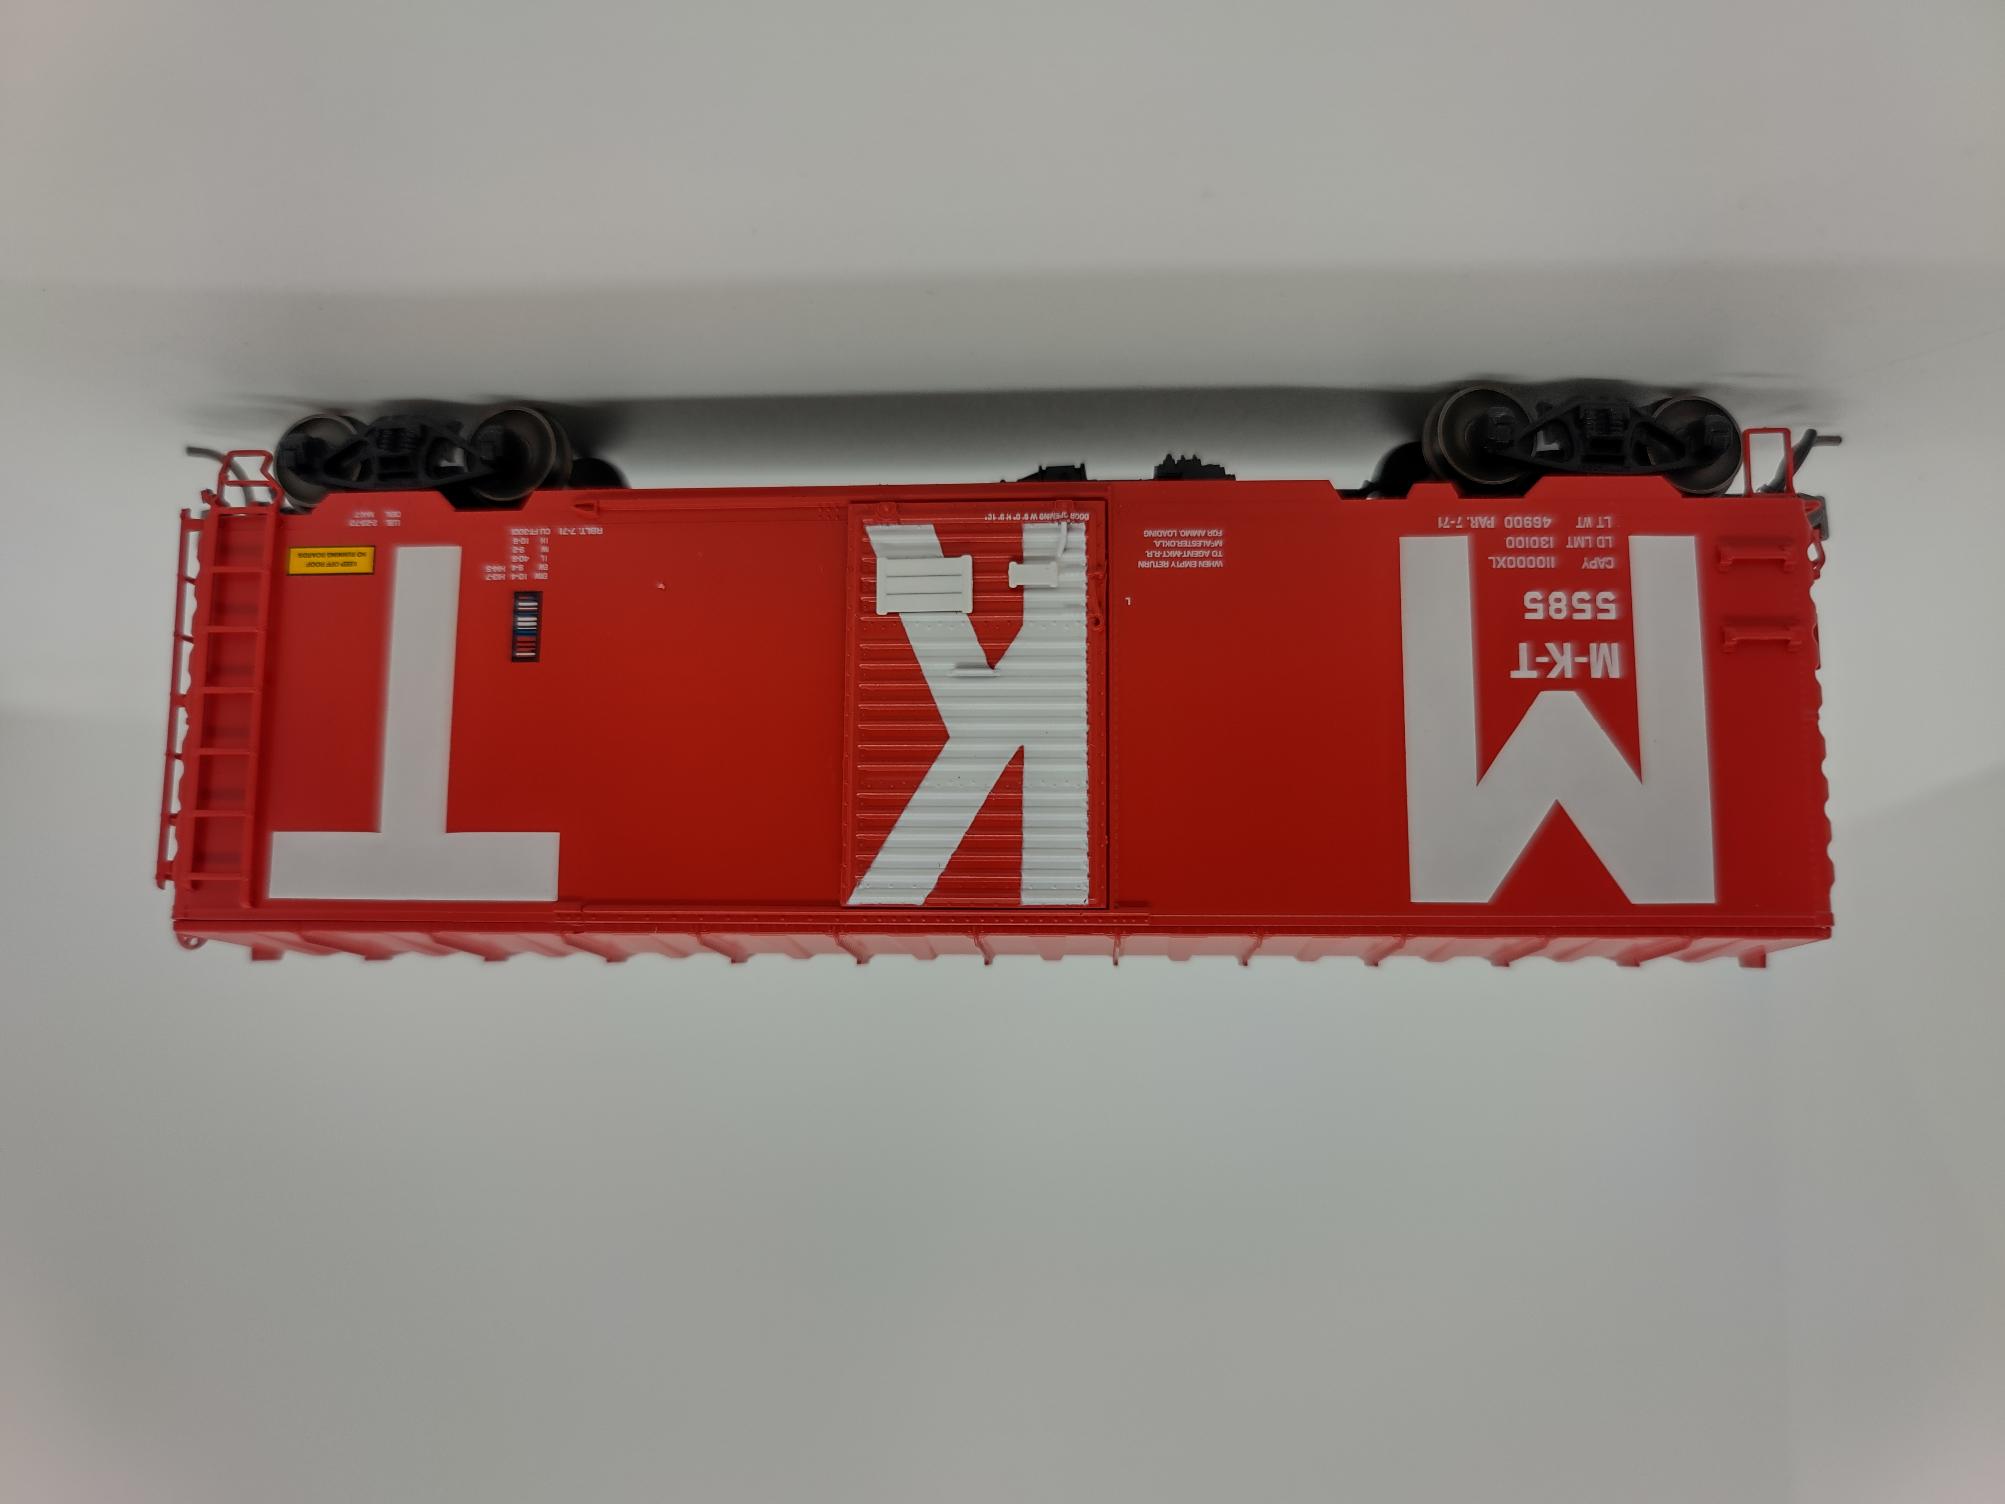 Intermountain 45421-16 - HO 40Ft PS-1 Boxcar - MKT (Large White MKT on Red) #5585